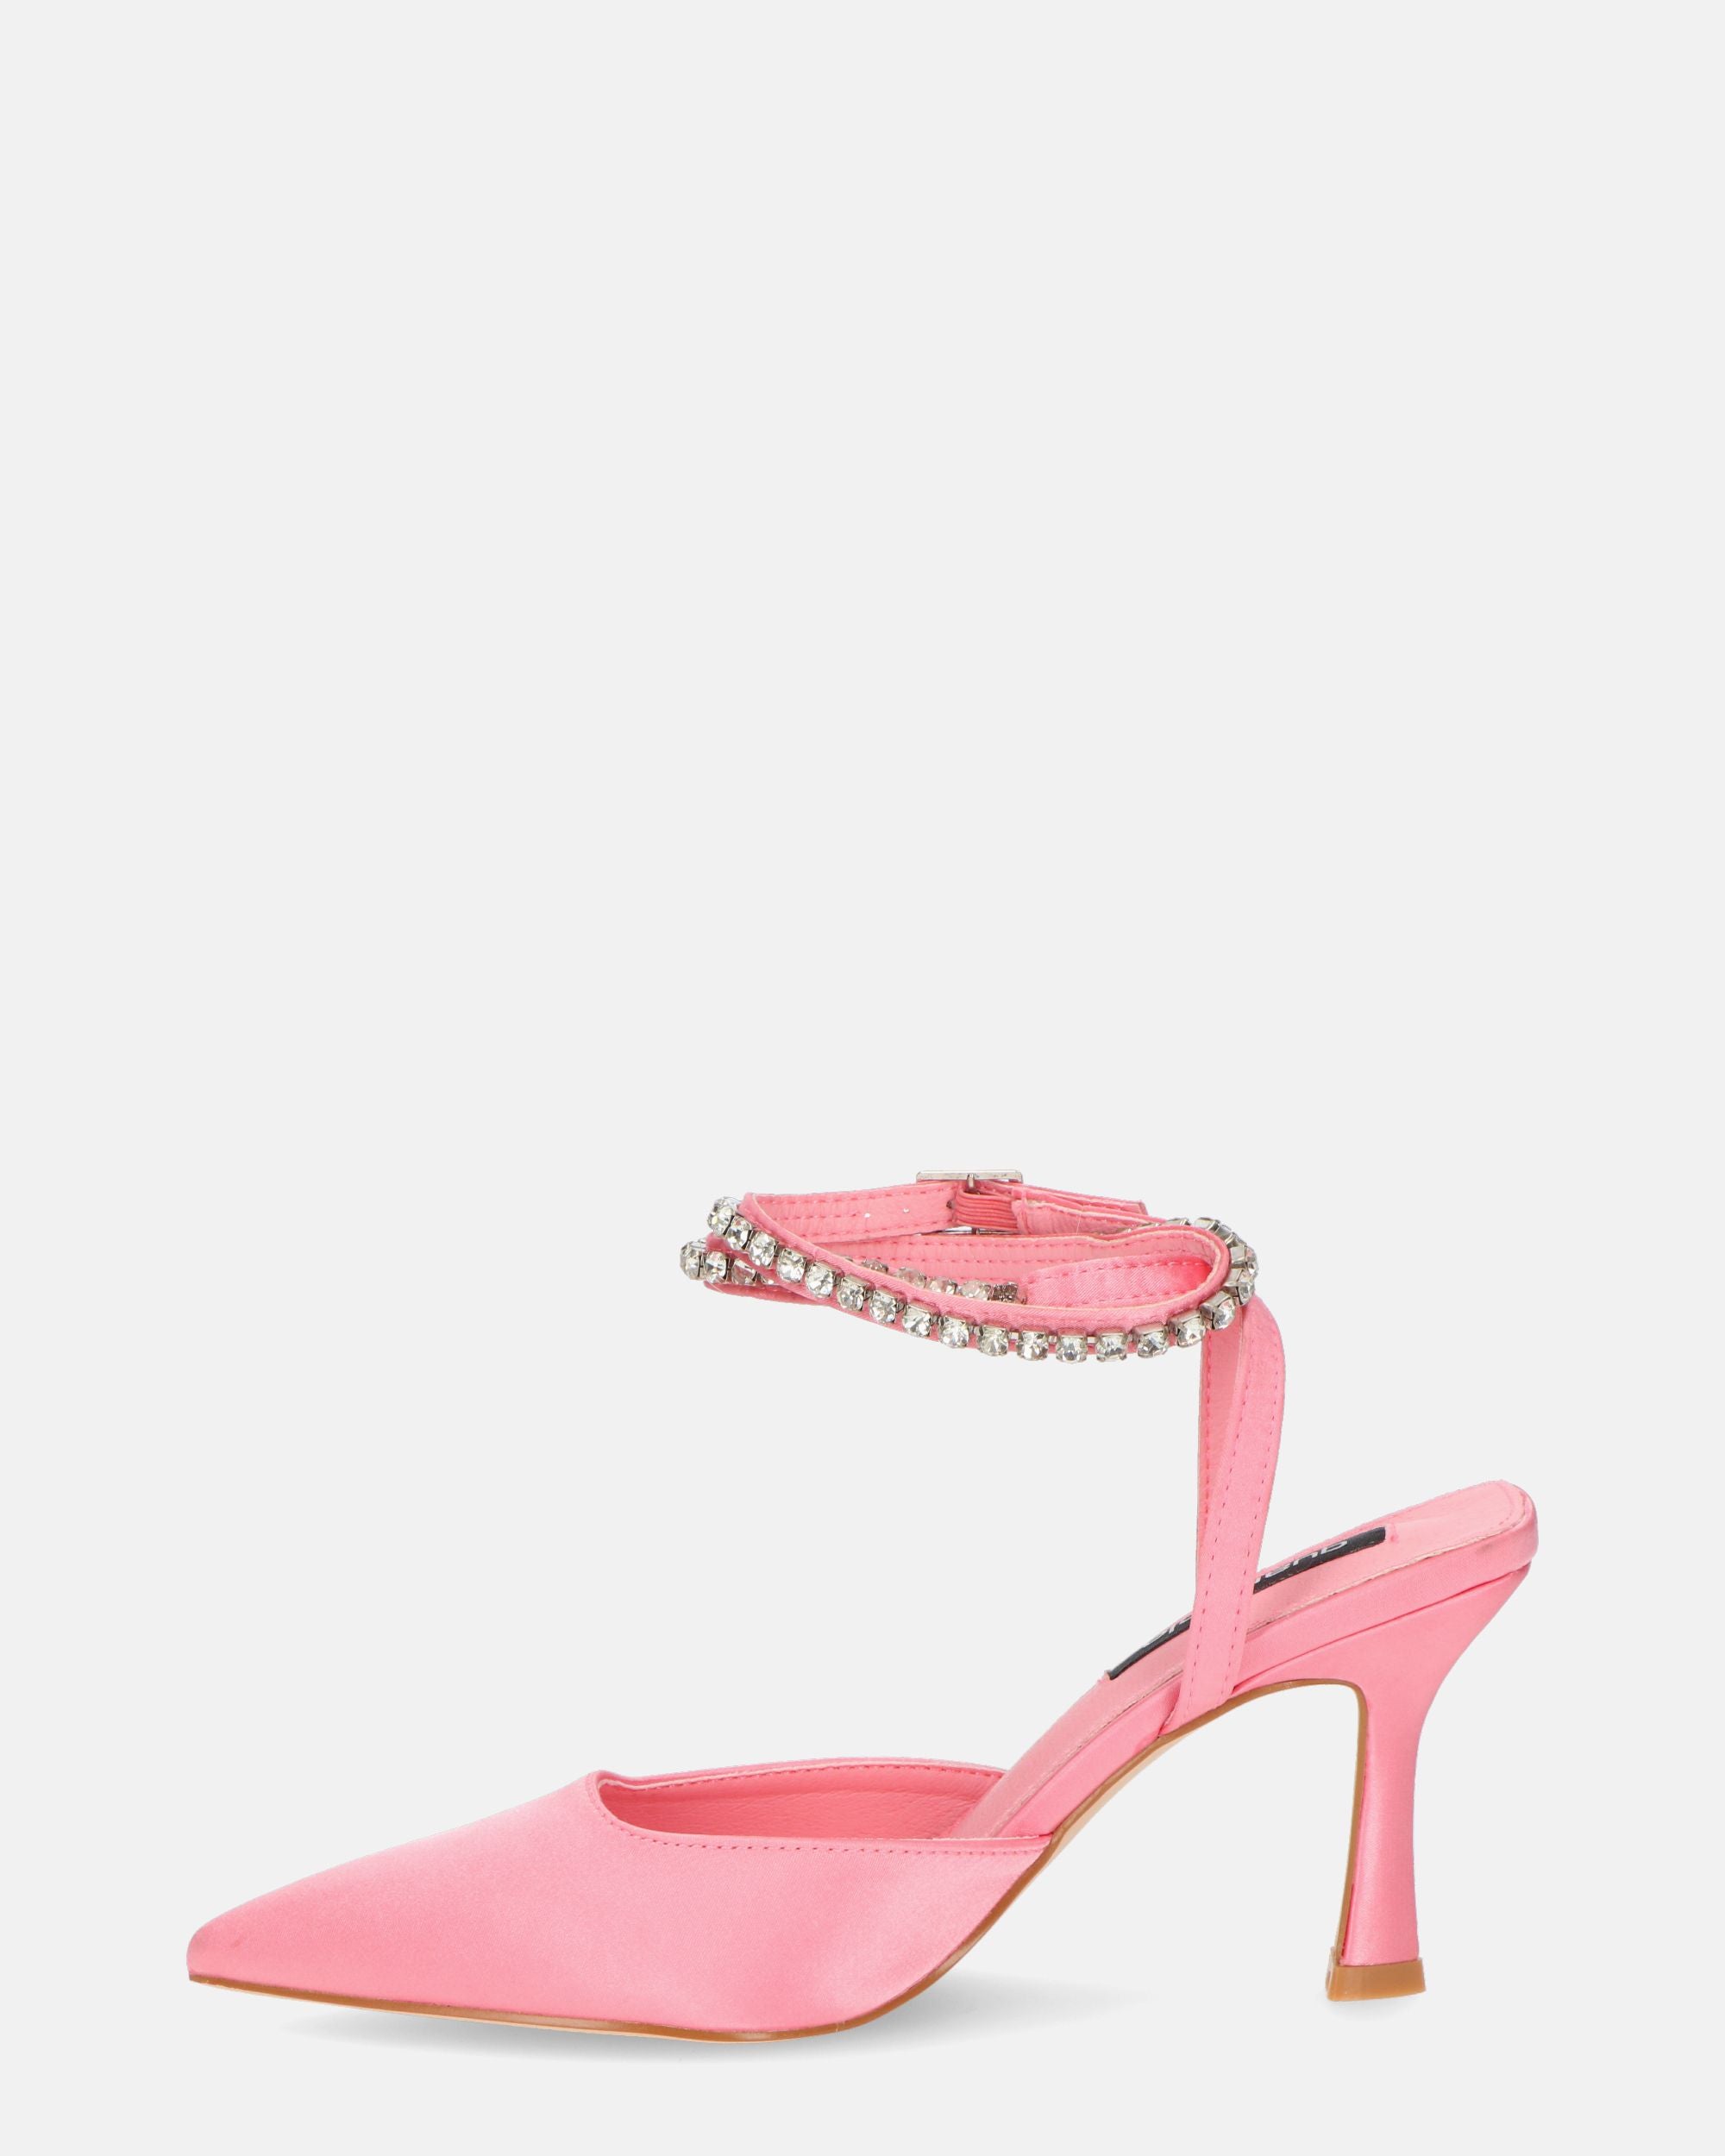 DORIS - heeled shoes in light pink lycra and gems on the strap